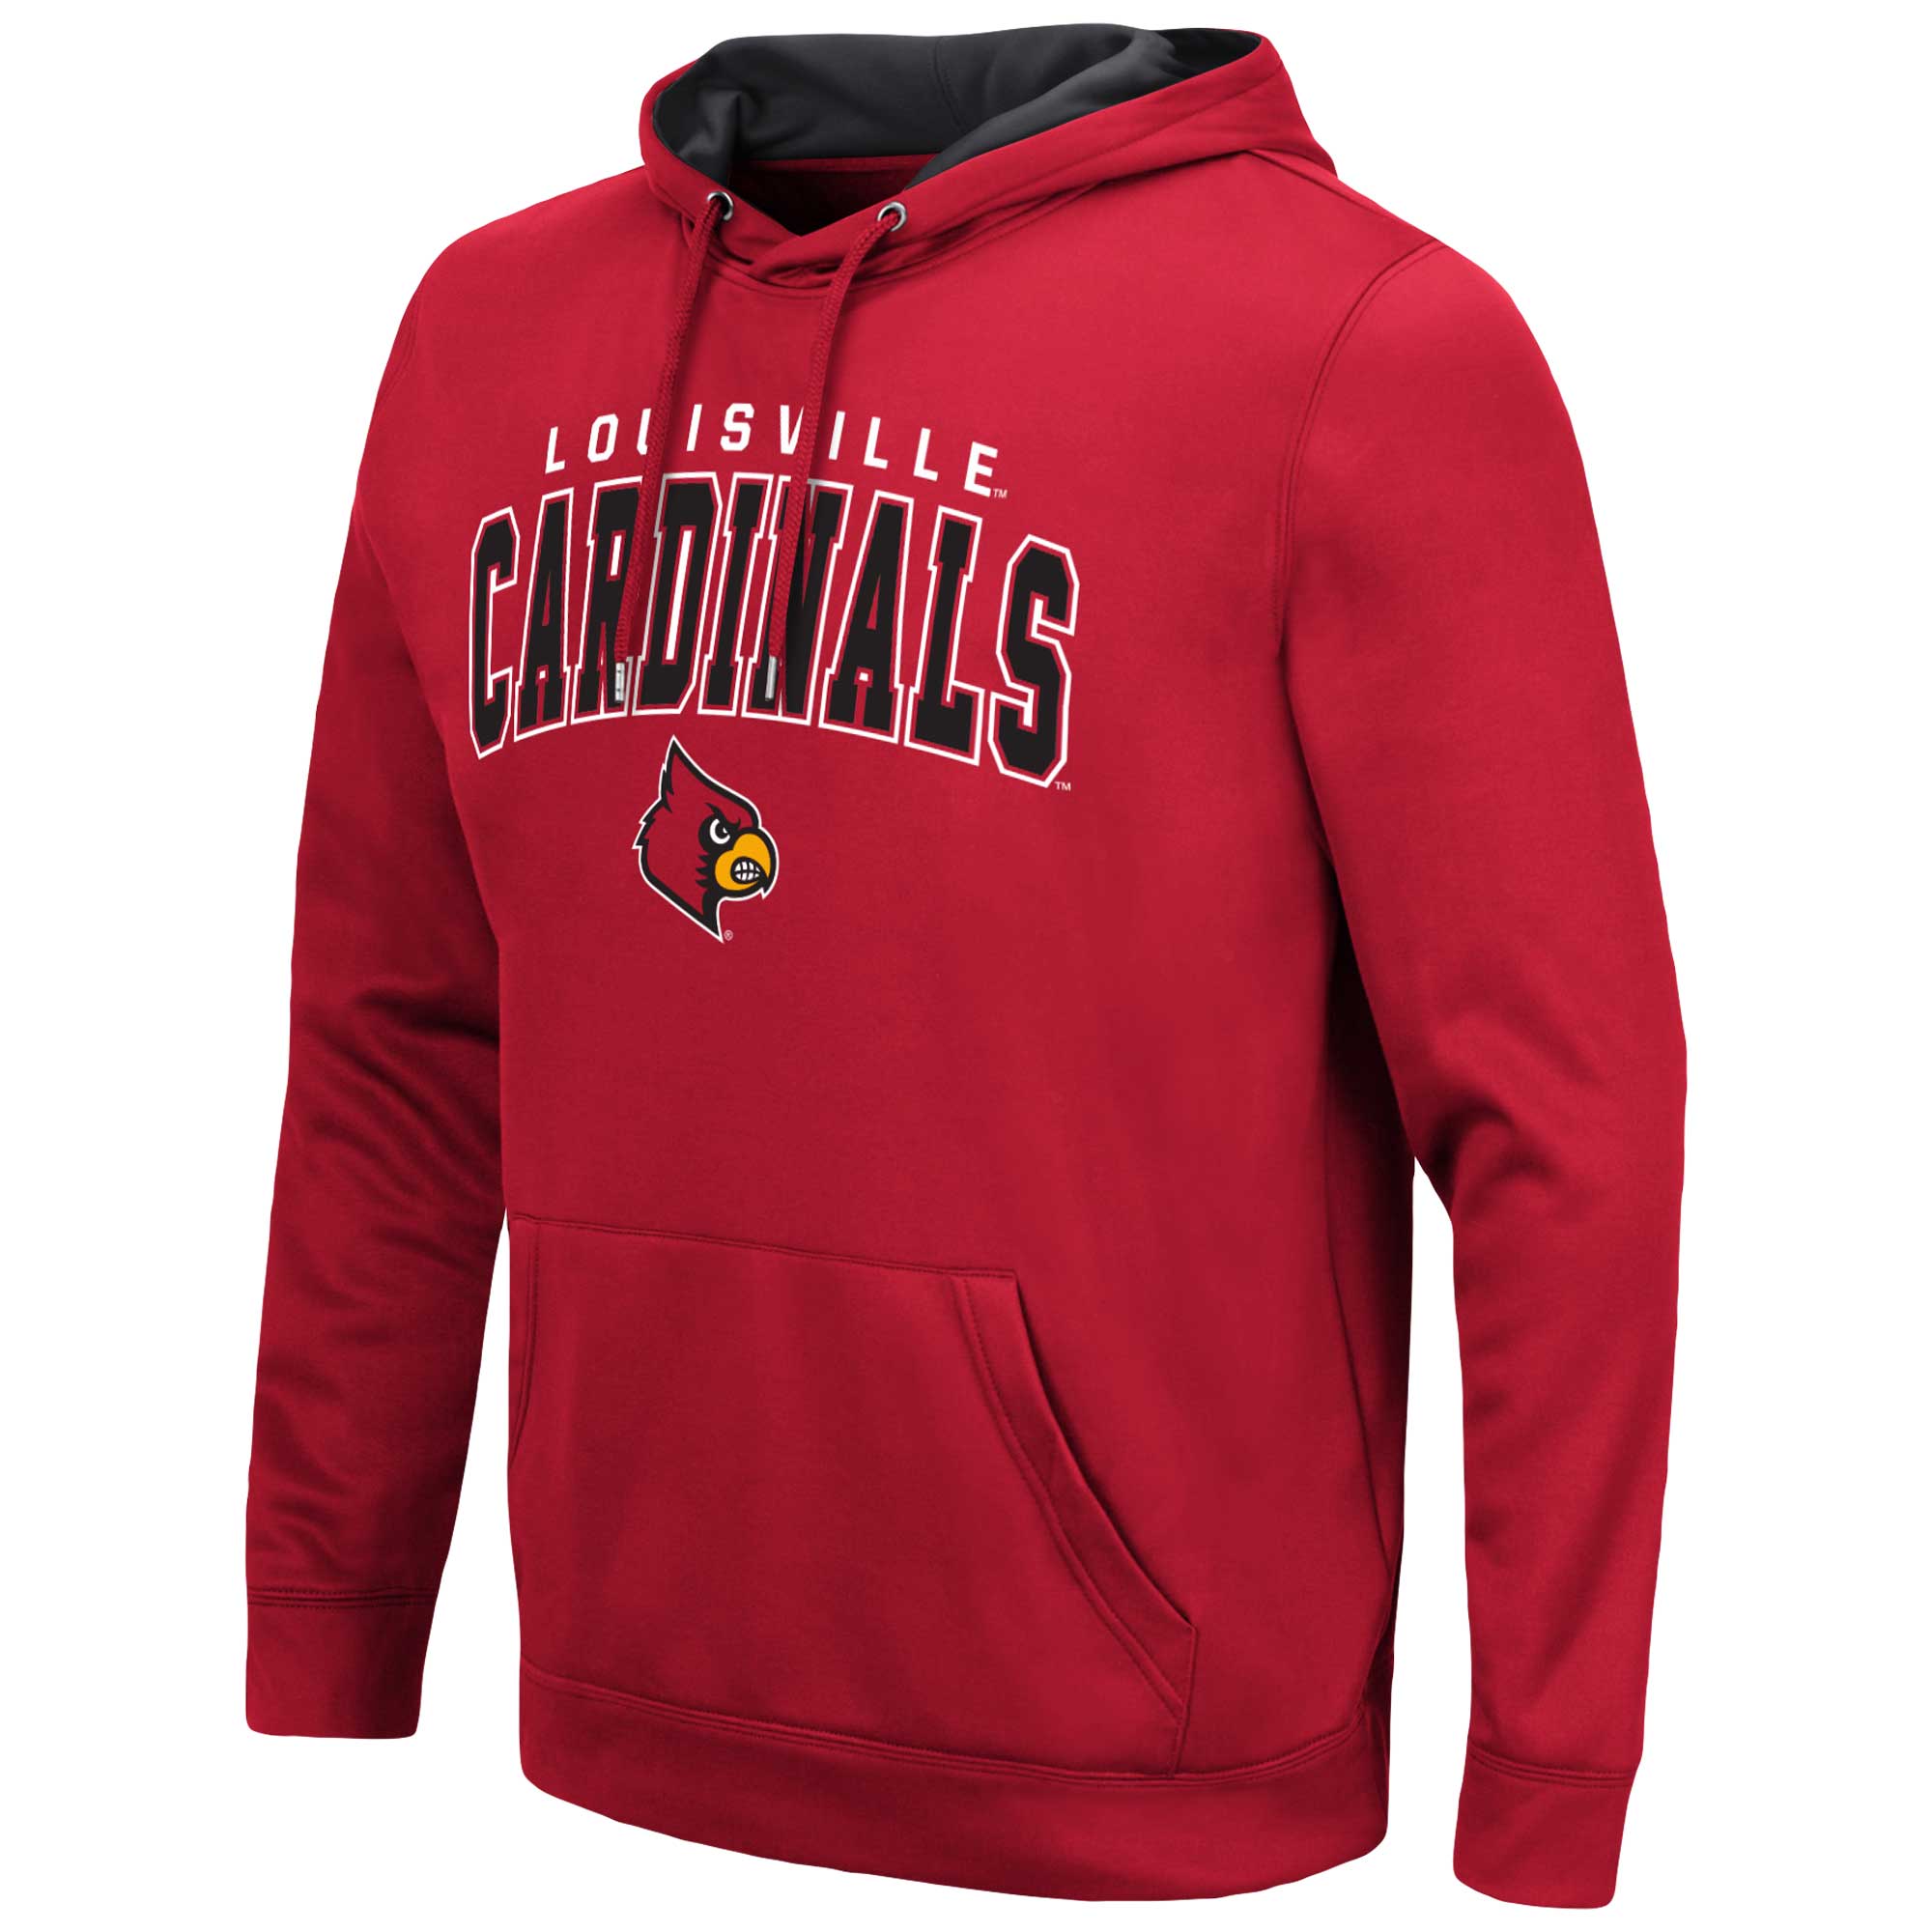 Men's Colosseum Red Louisville Cardinals Resistance-Pullover Hoodie - image 2 of 3